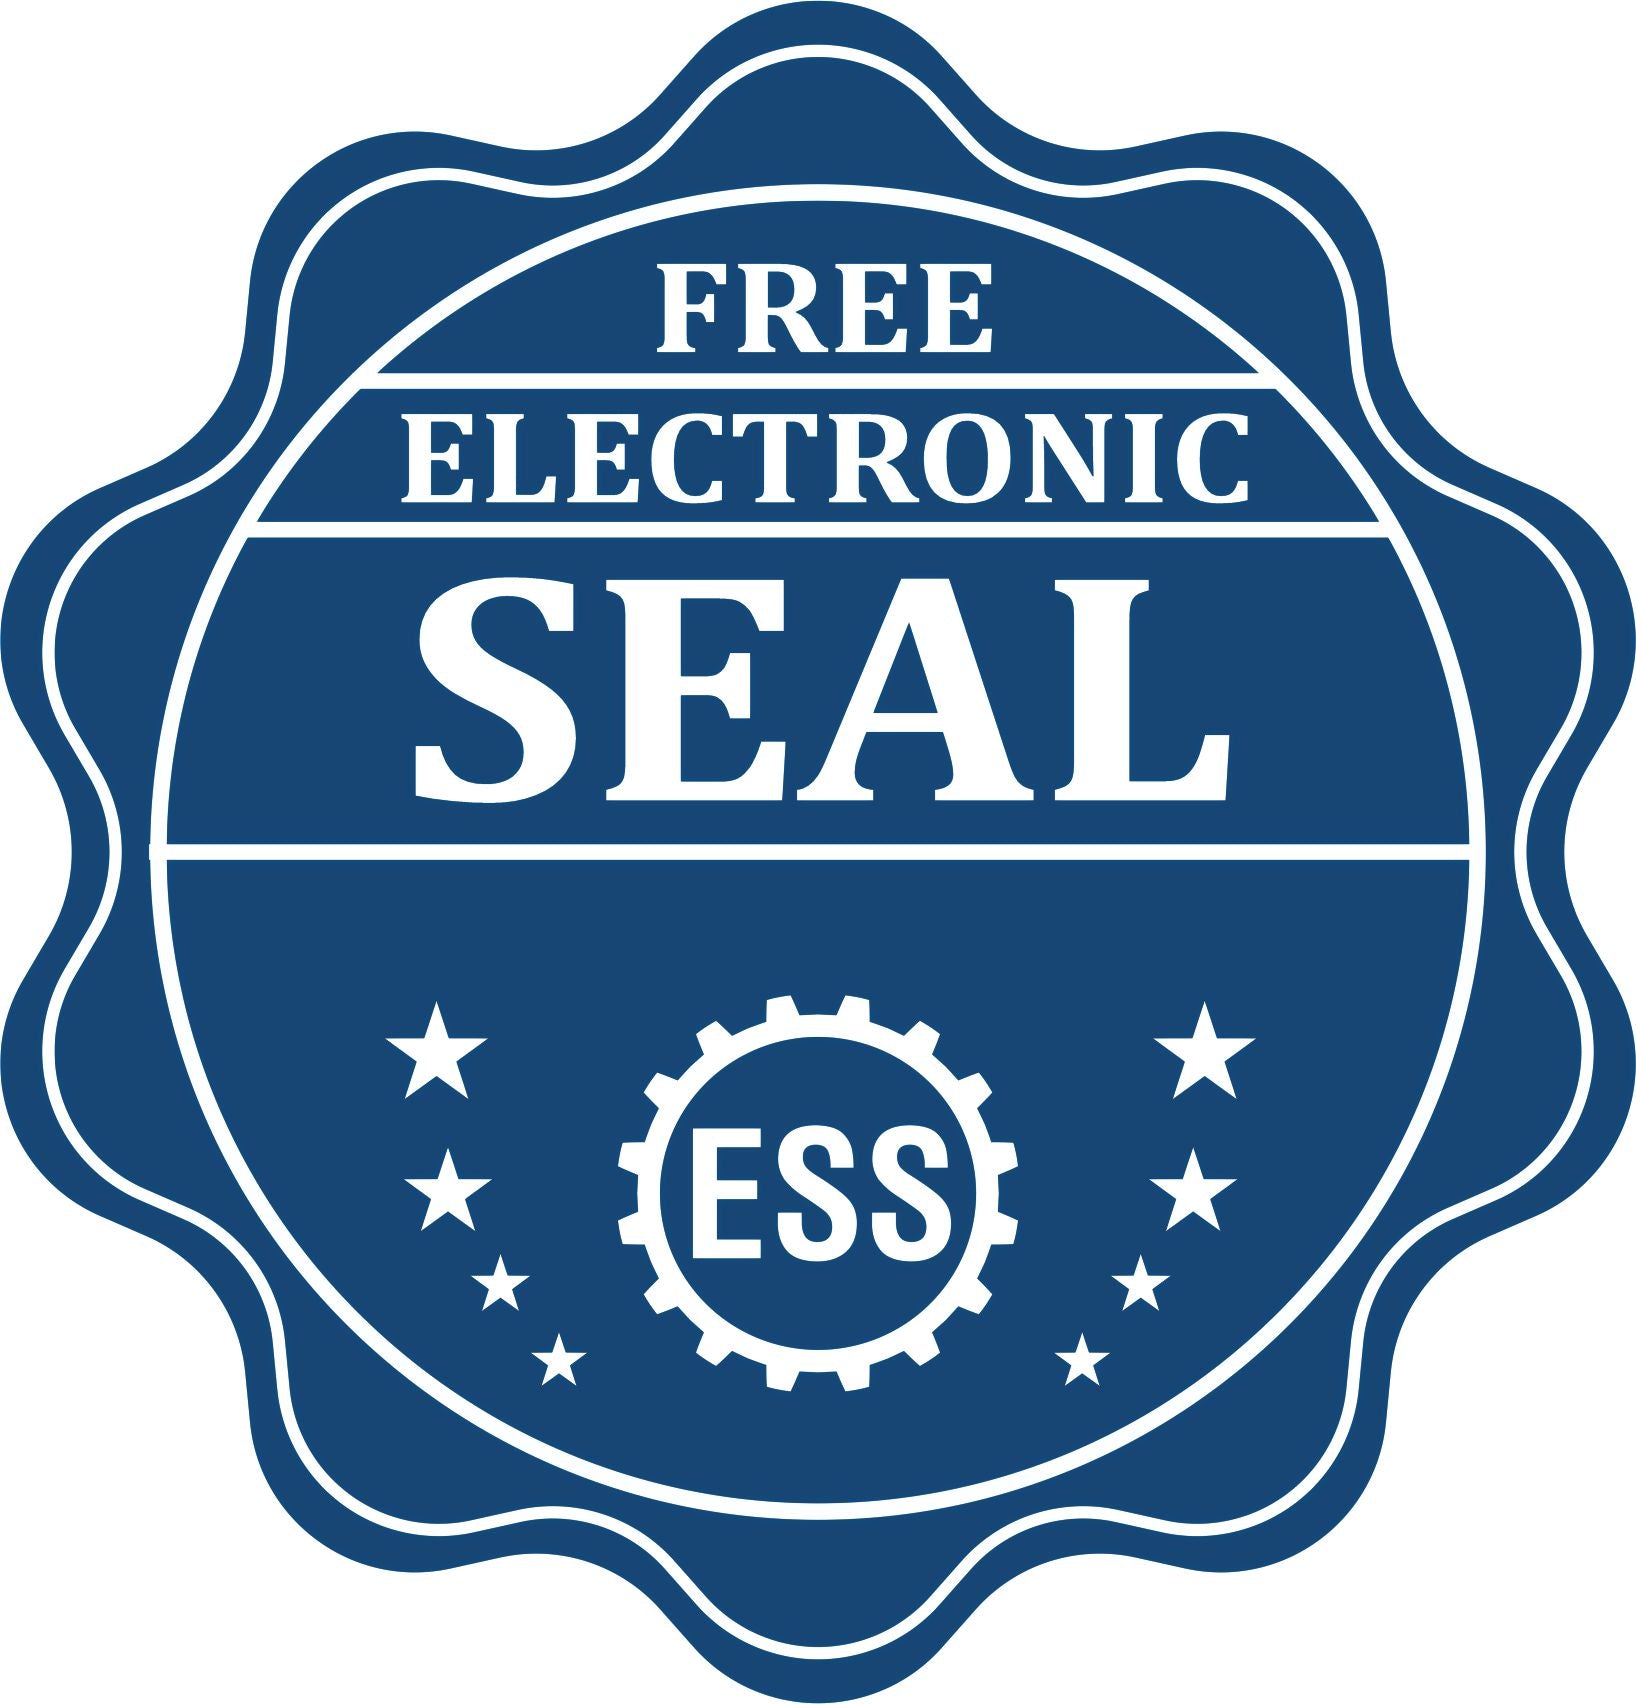 A badge showing a free electronic seal for the State of Michigan Extended Long Reach Geologist Seal with stars and the ESS gear on the emblem.